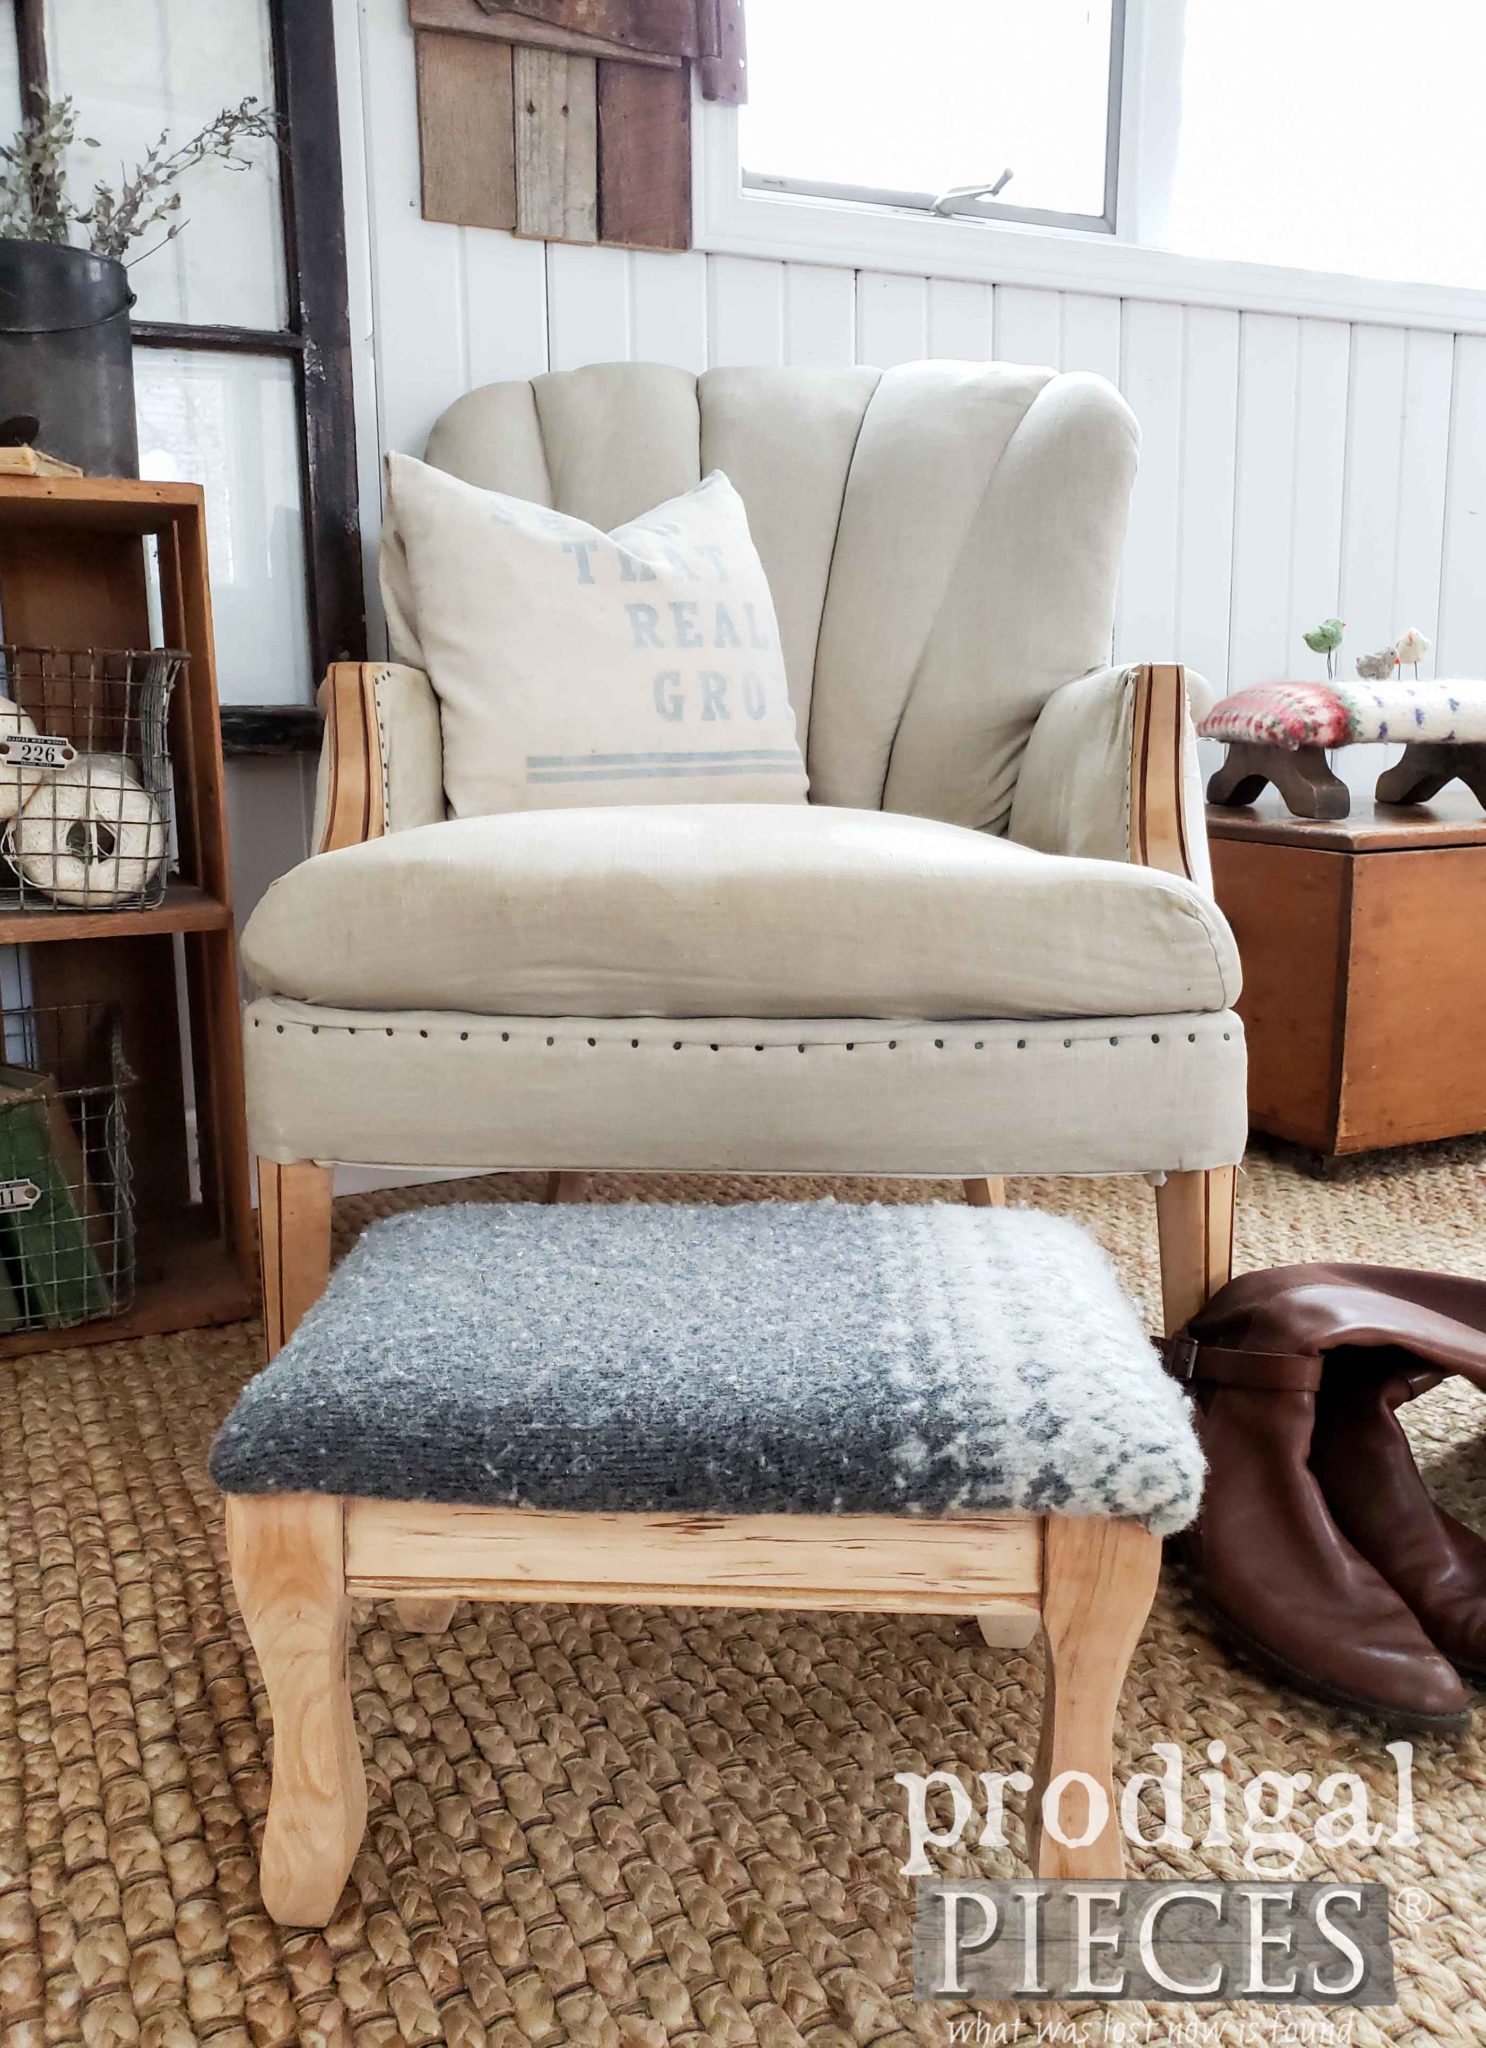 Farmhouse Style Upholstered Footstool with Felted Wool by Larissa of Prodigal Pieces | Video Tutorial at prodigalpieces.com #prodigalpieces #diy #handmade #furniture #home #shopping #homedecor #homedecorideas